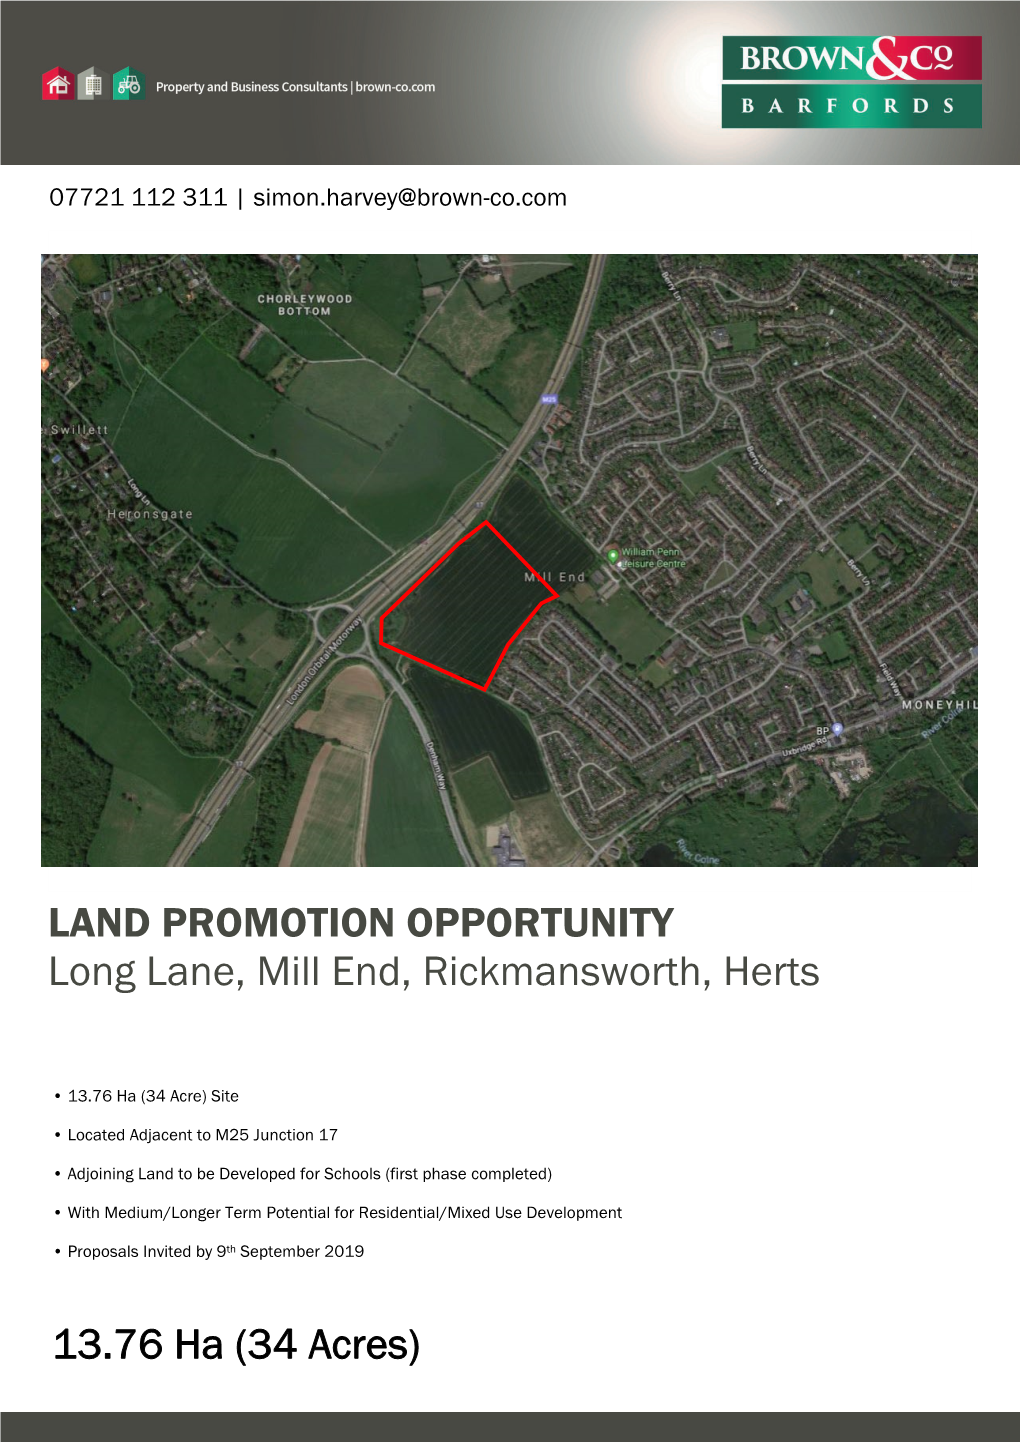 LAND PROMOTION OPPORTUNITY Long Lane, Mill End, Rickmansworth, Herts